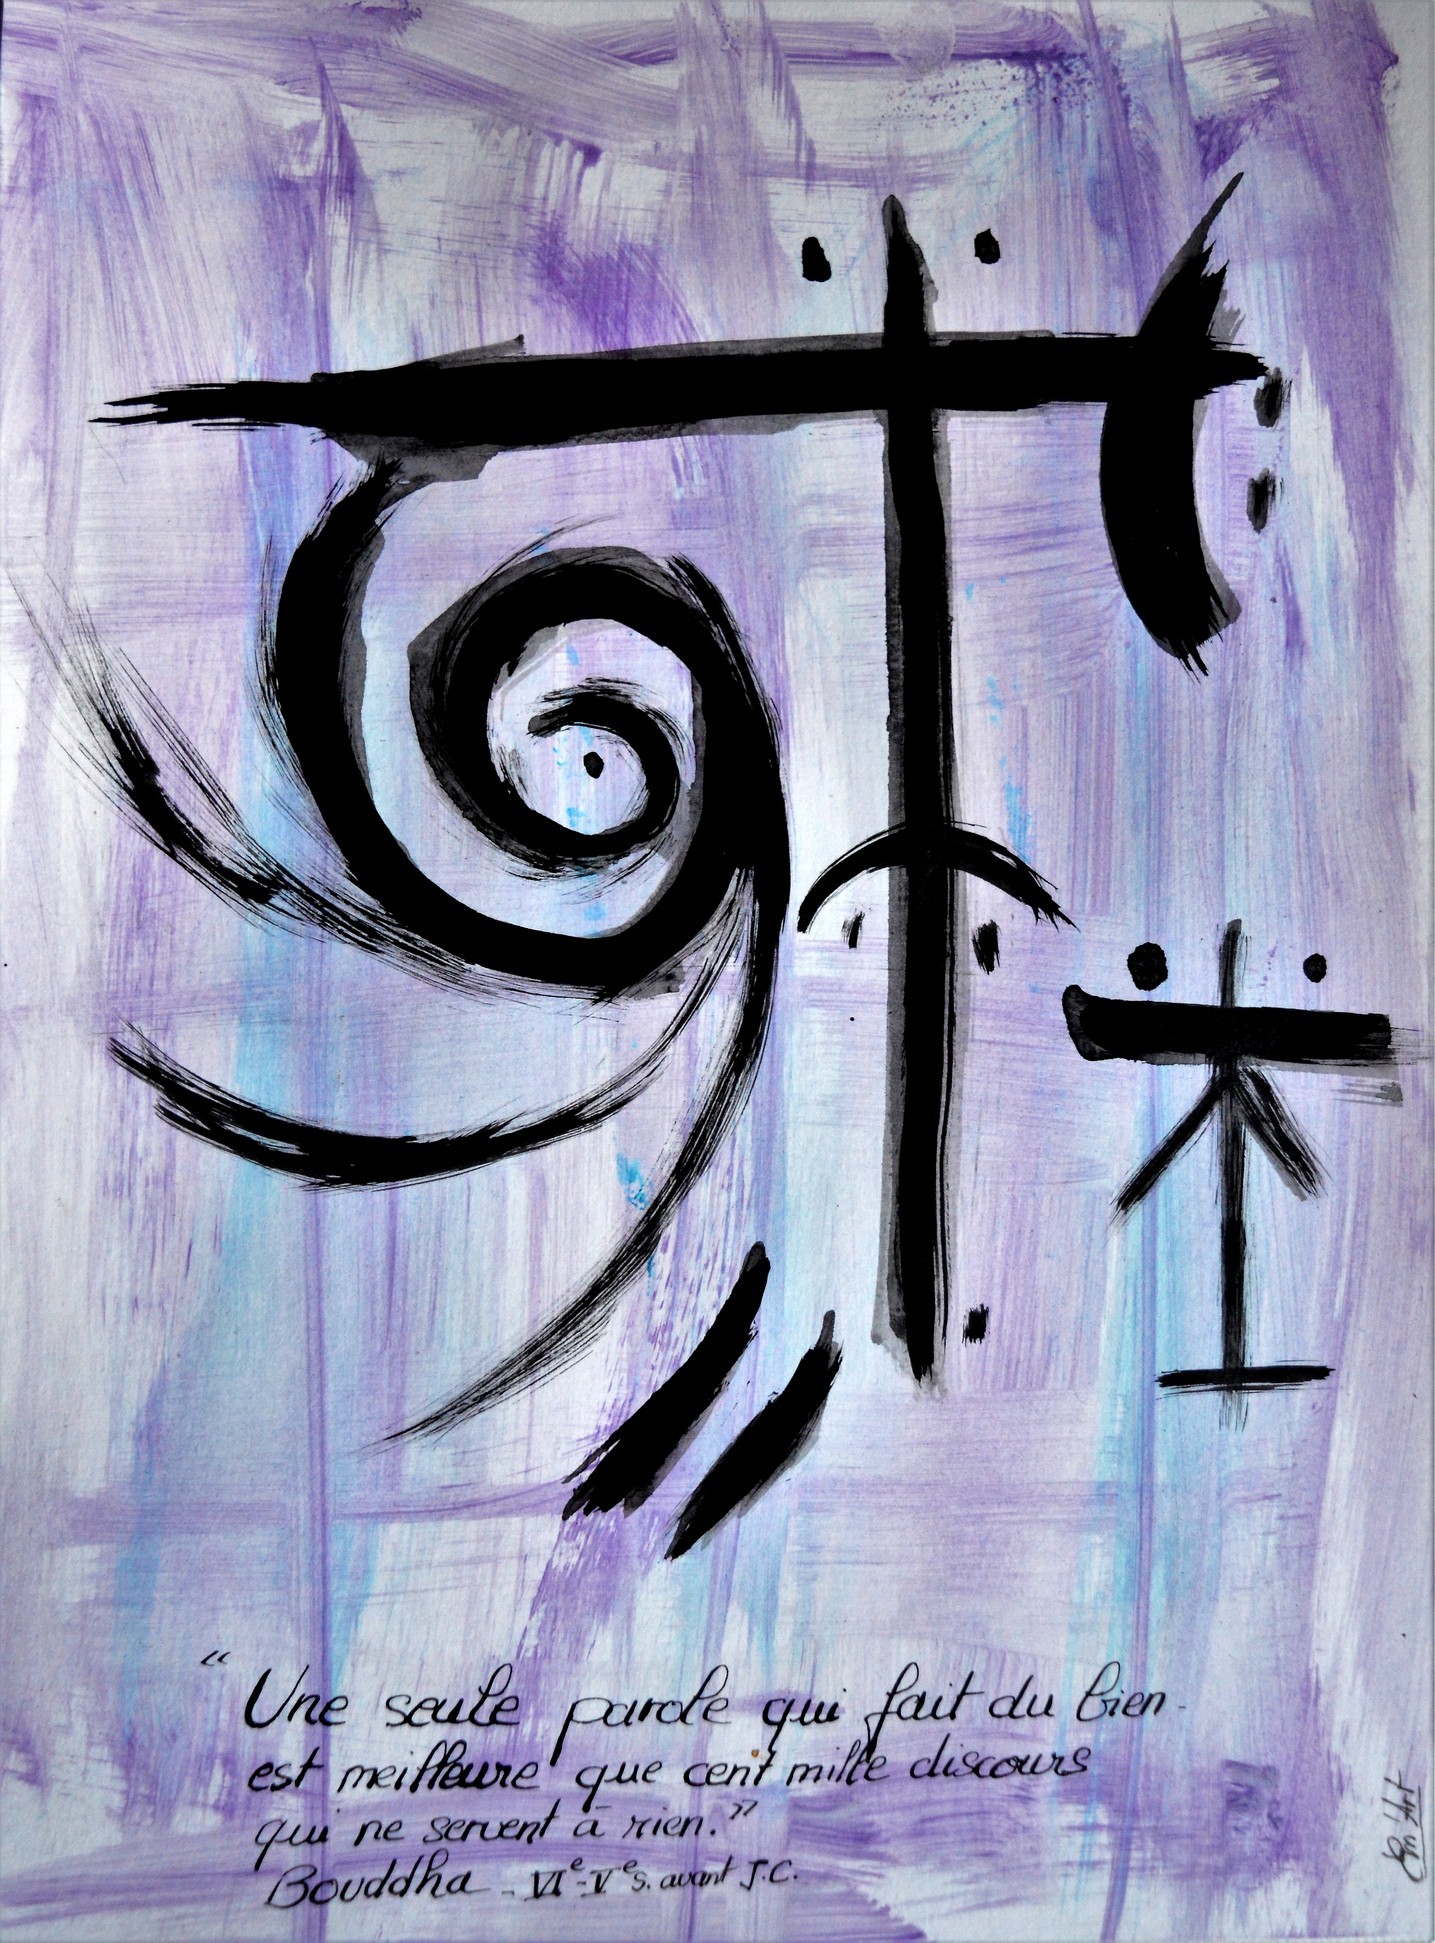 Buddha's Words, mixed painting by Emmanuelle Baudry